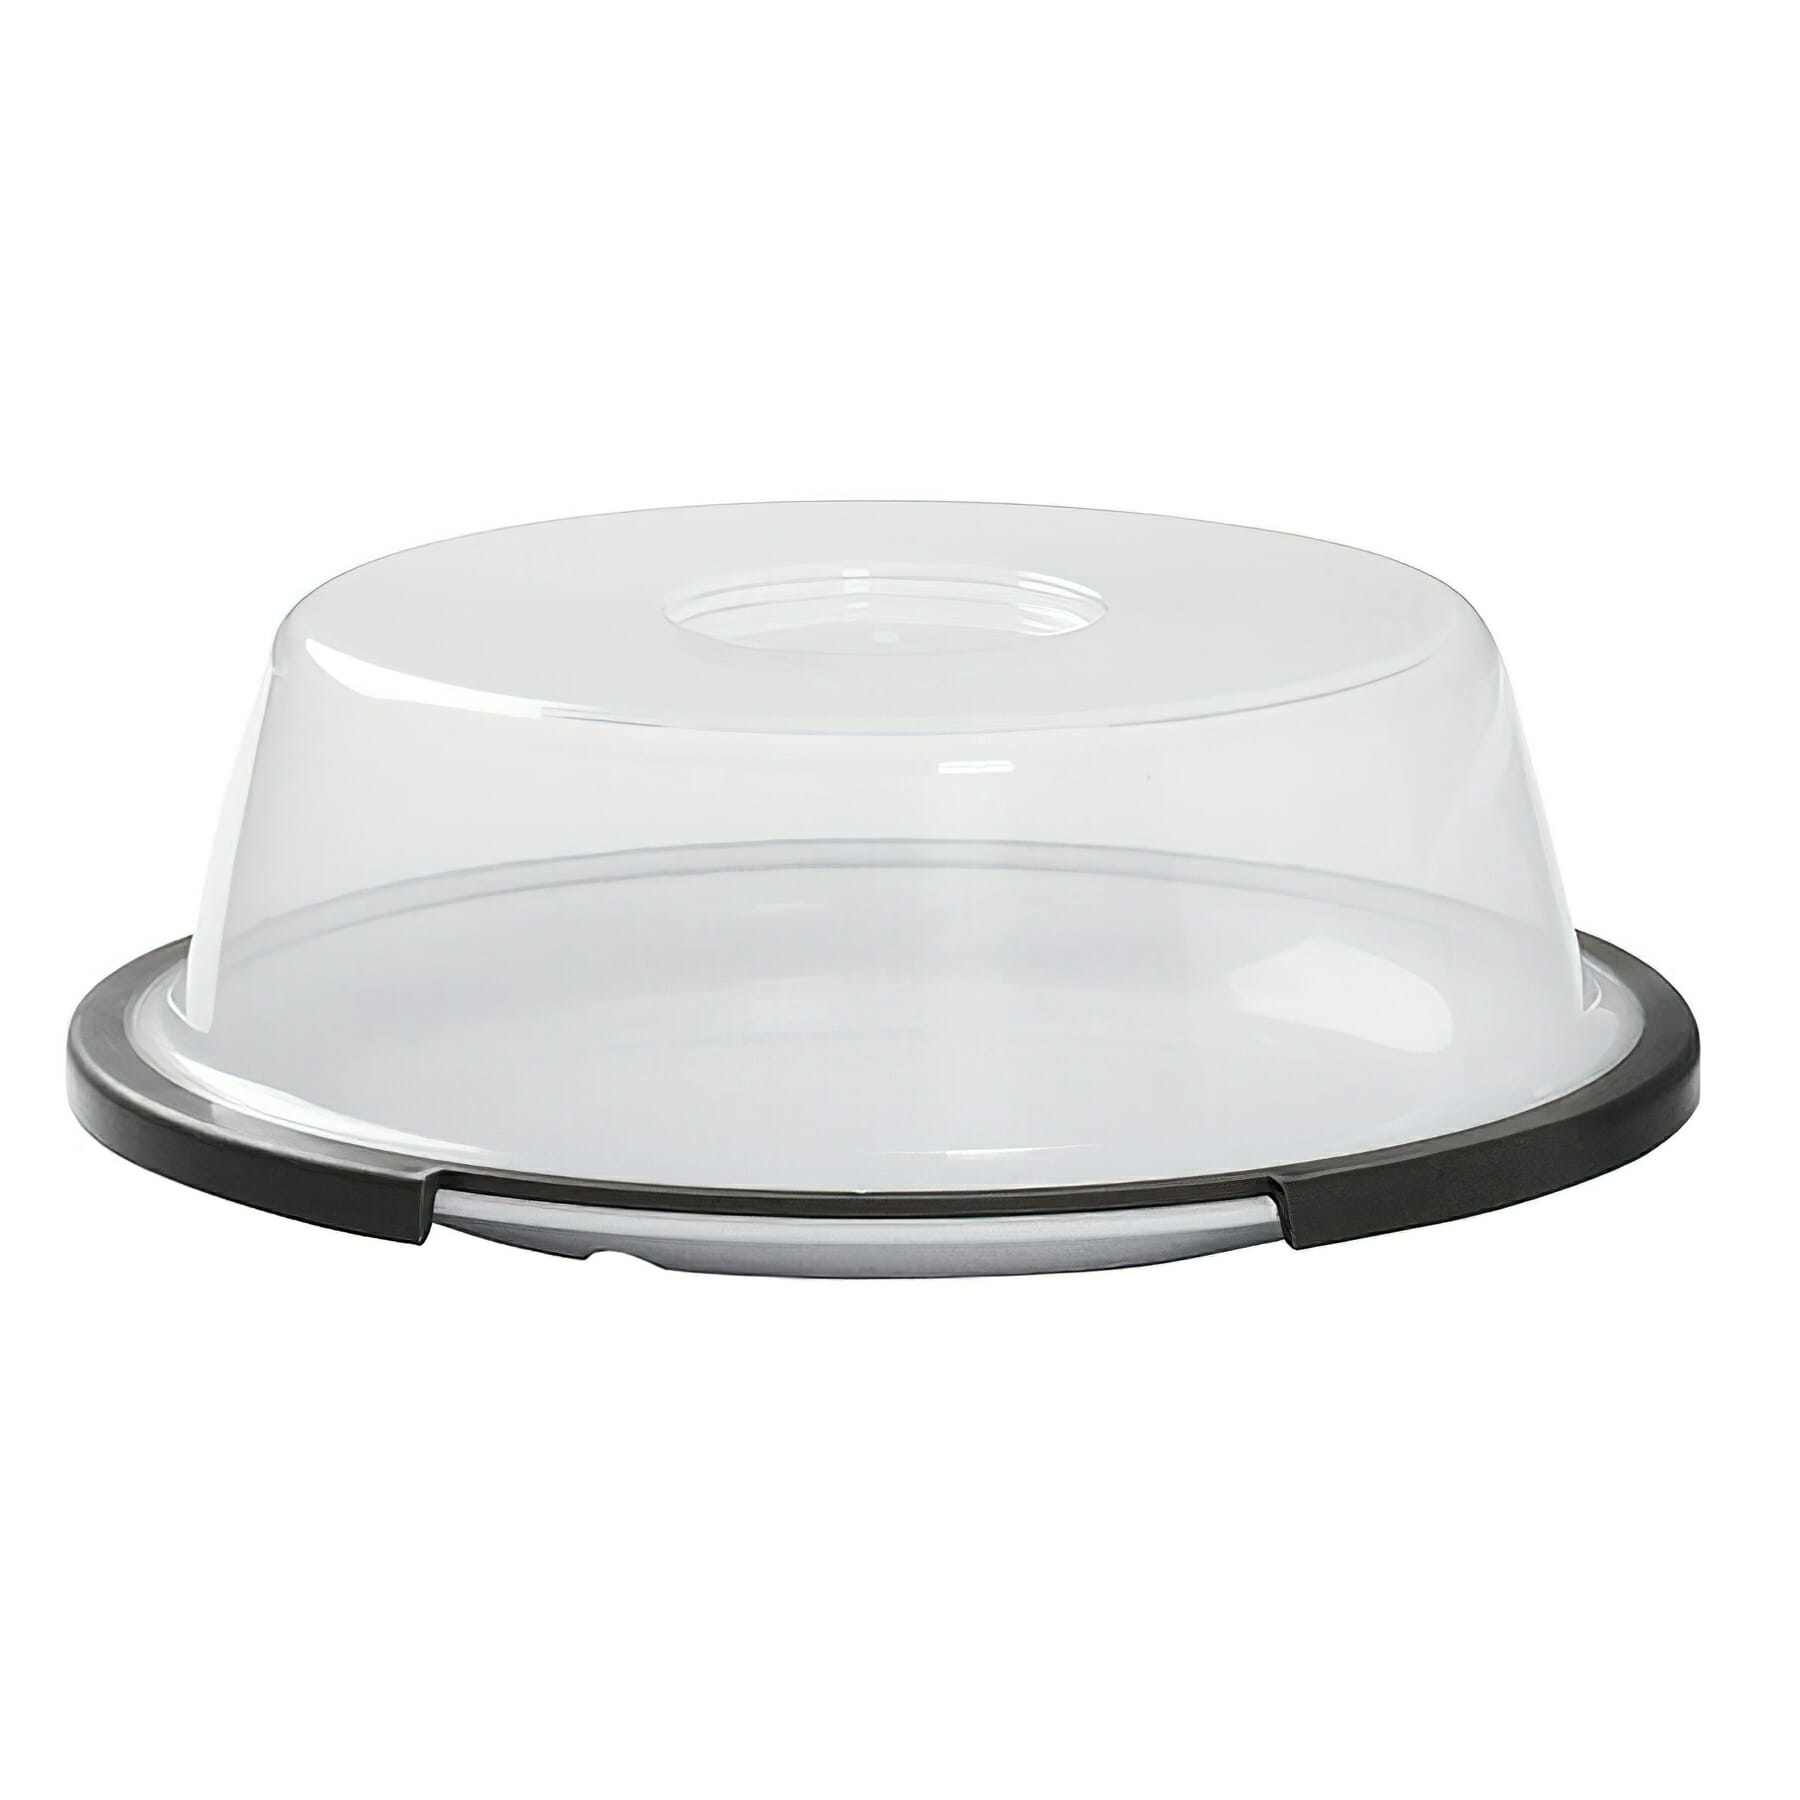 Reusable Plate Cover for WP-10 (Top Inset Dia. 2.75", Top Inset Securely Holds B-45 Bowl) PATENT PENDING